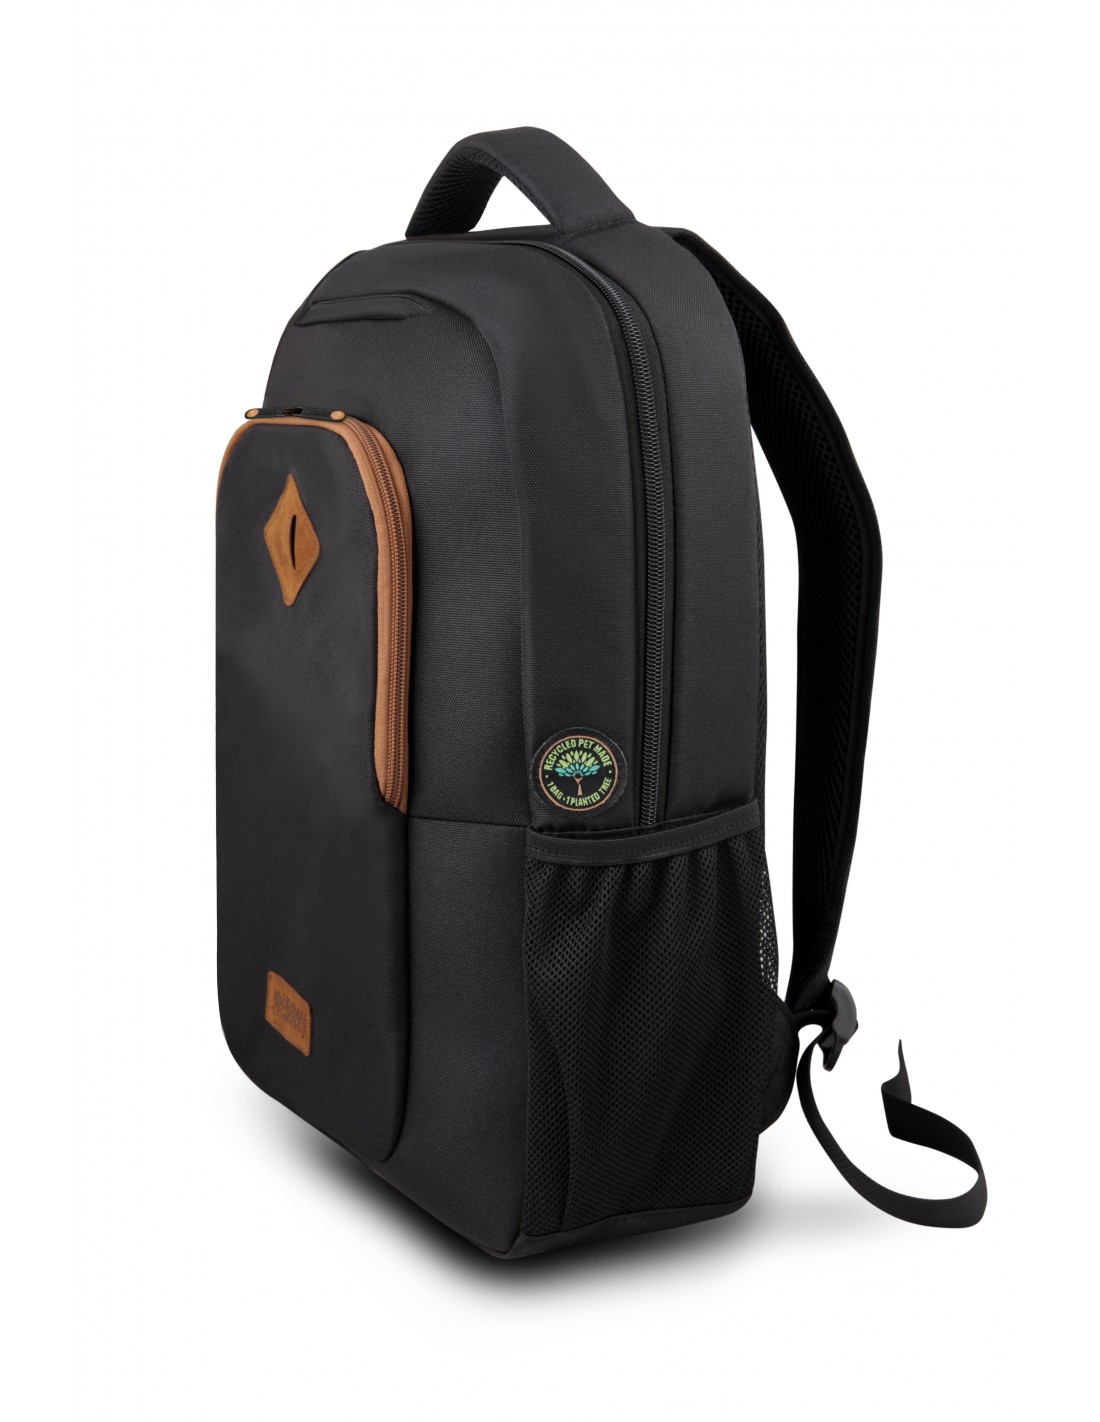 Eco-freindly Backpack made from recycled